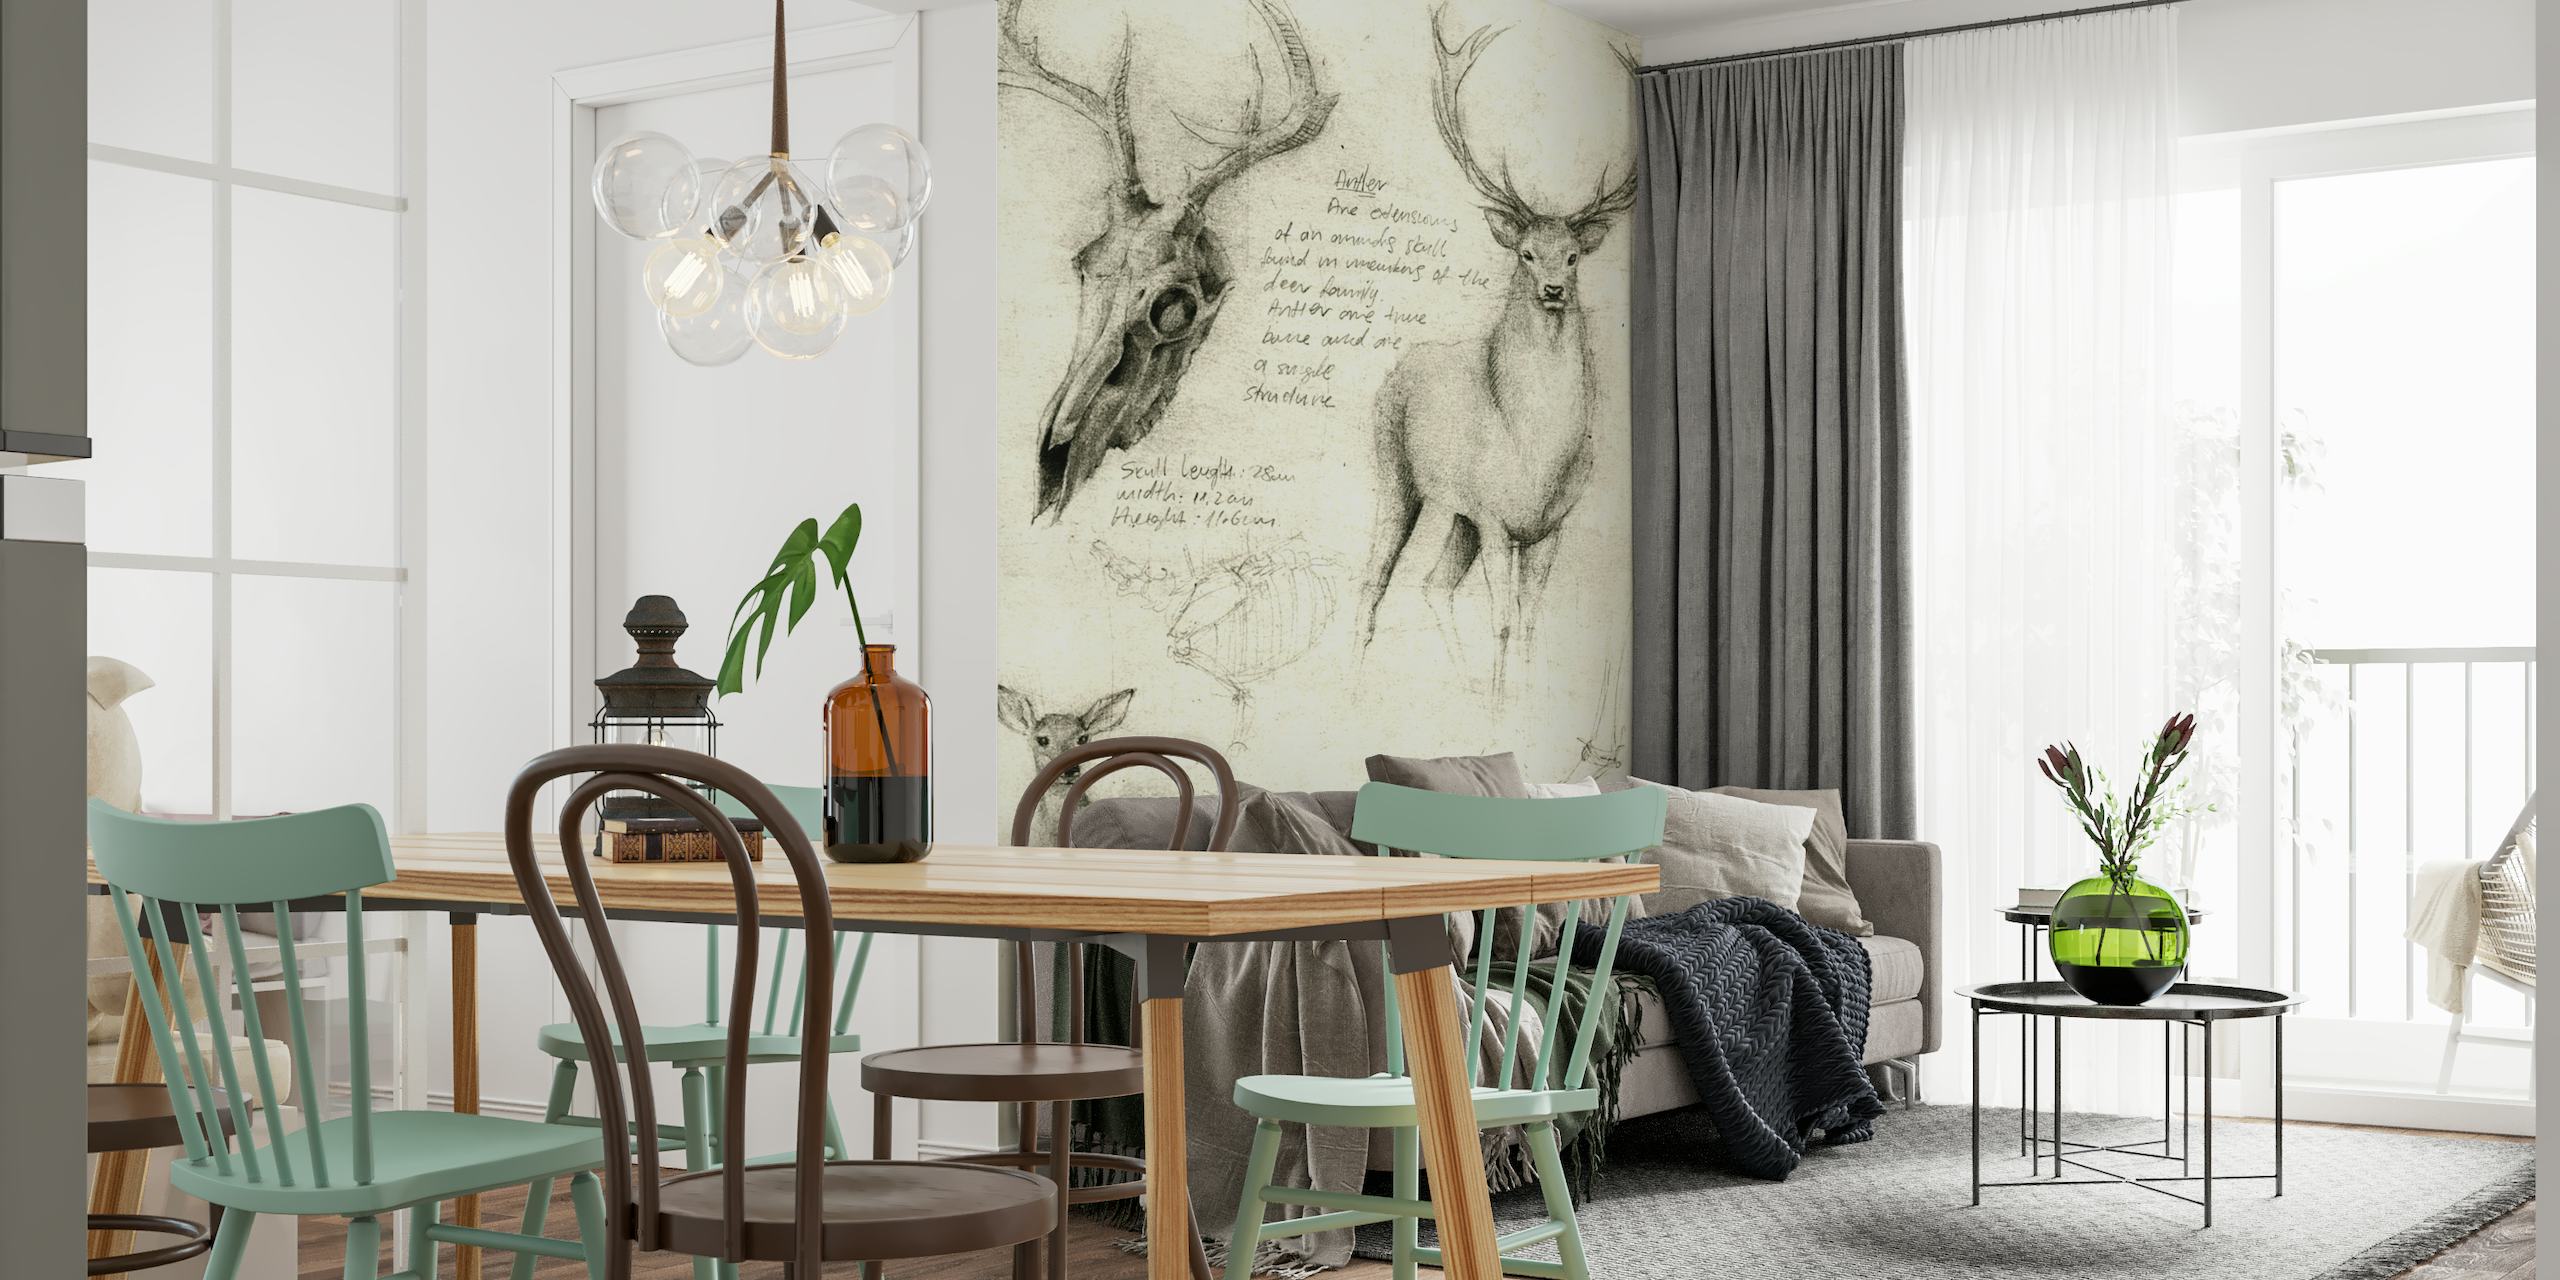 Sketches of deer in pencil on a wall mural at happywall.com